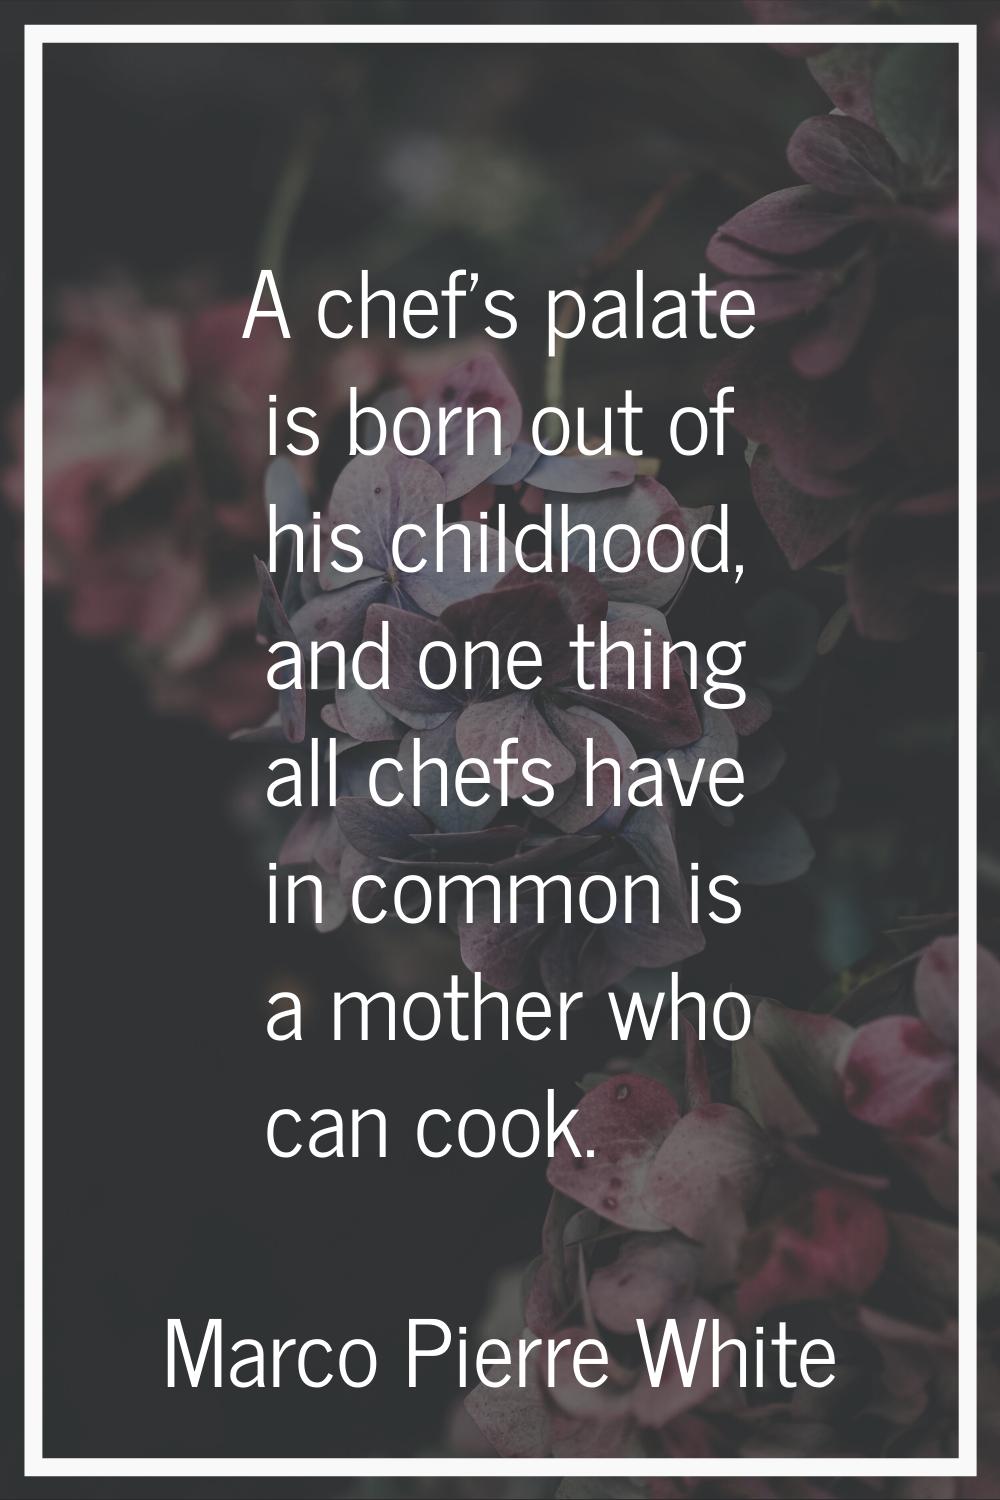 A chef's palate is born out of his childhood, and one thing all chefs have in common is a mother wh